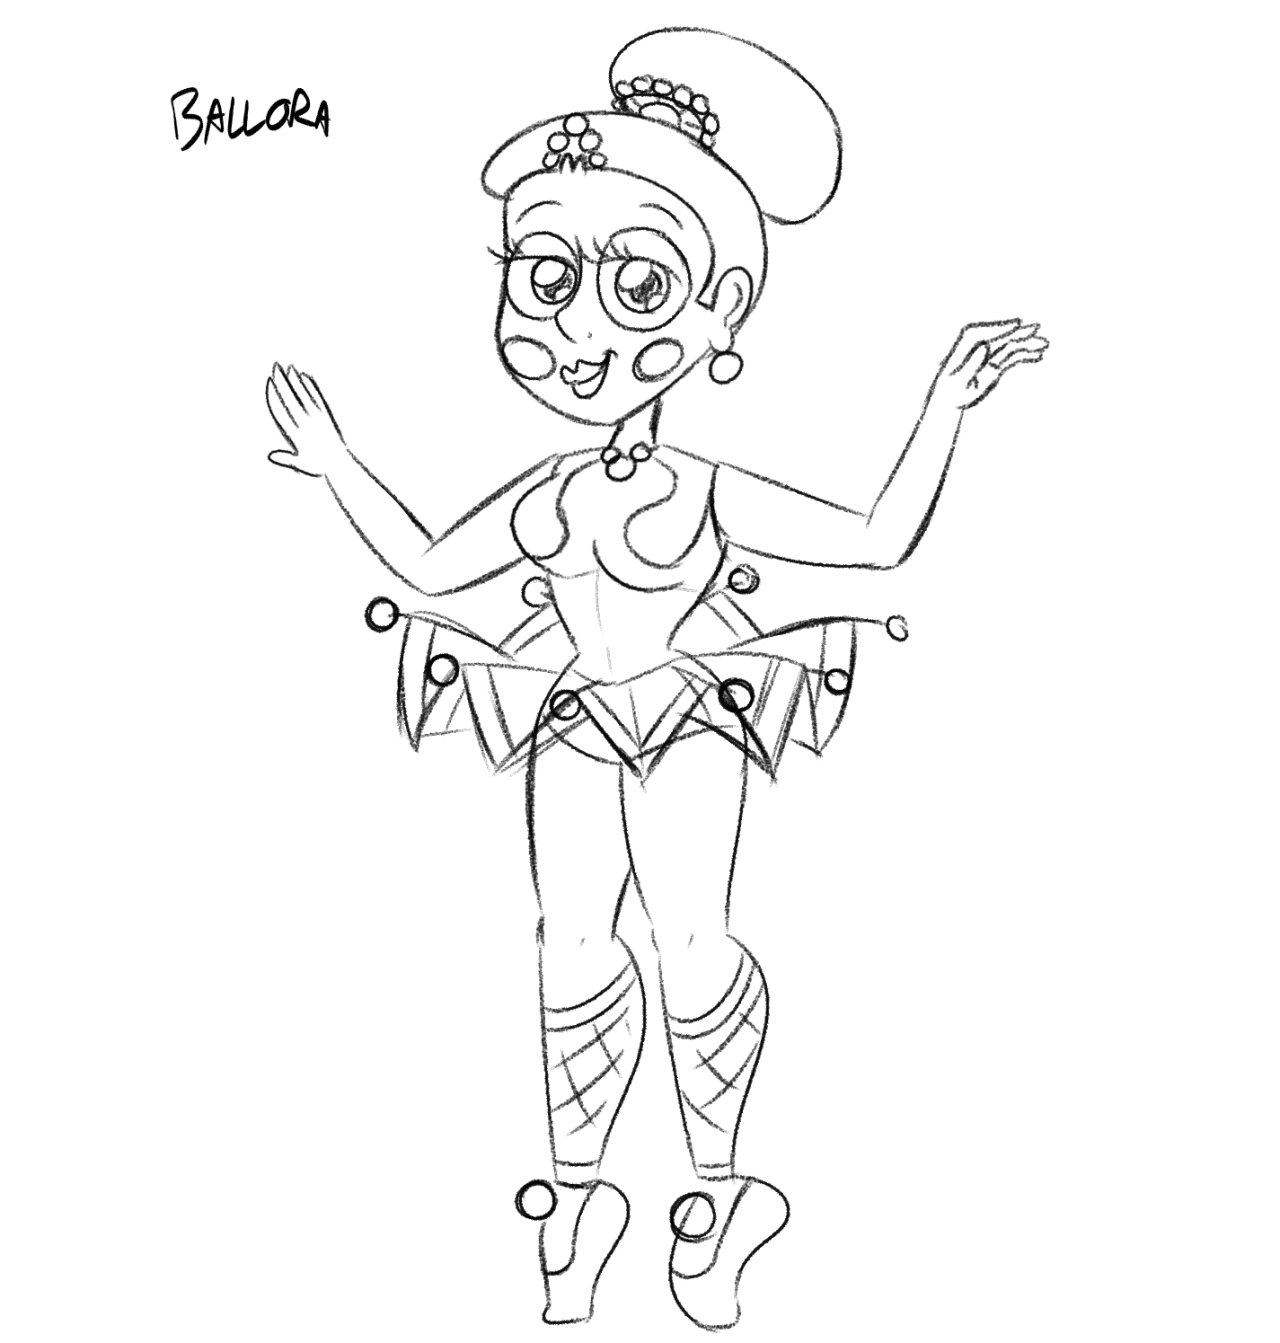 Blissfull: Fnaf Sister Location Ballora Coloring Pages